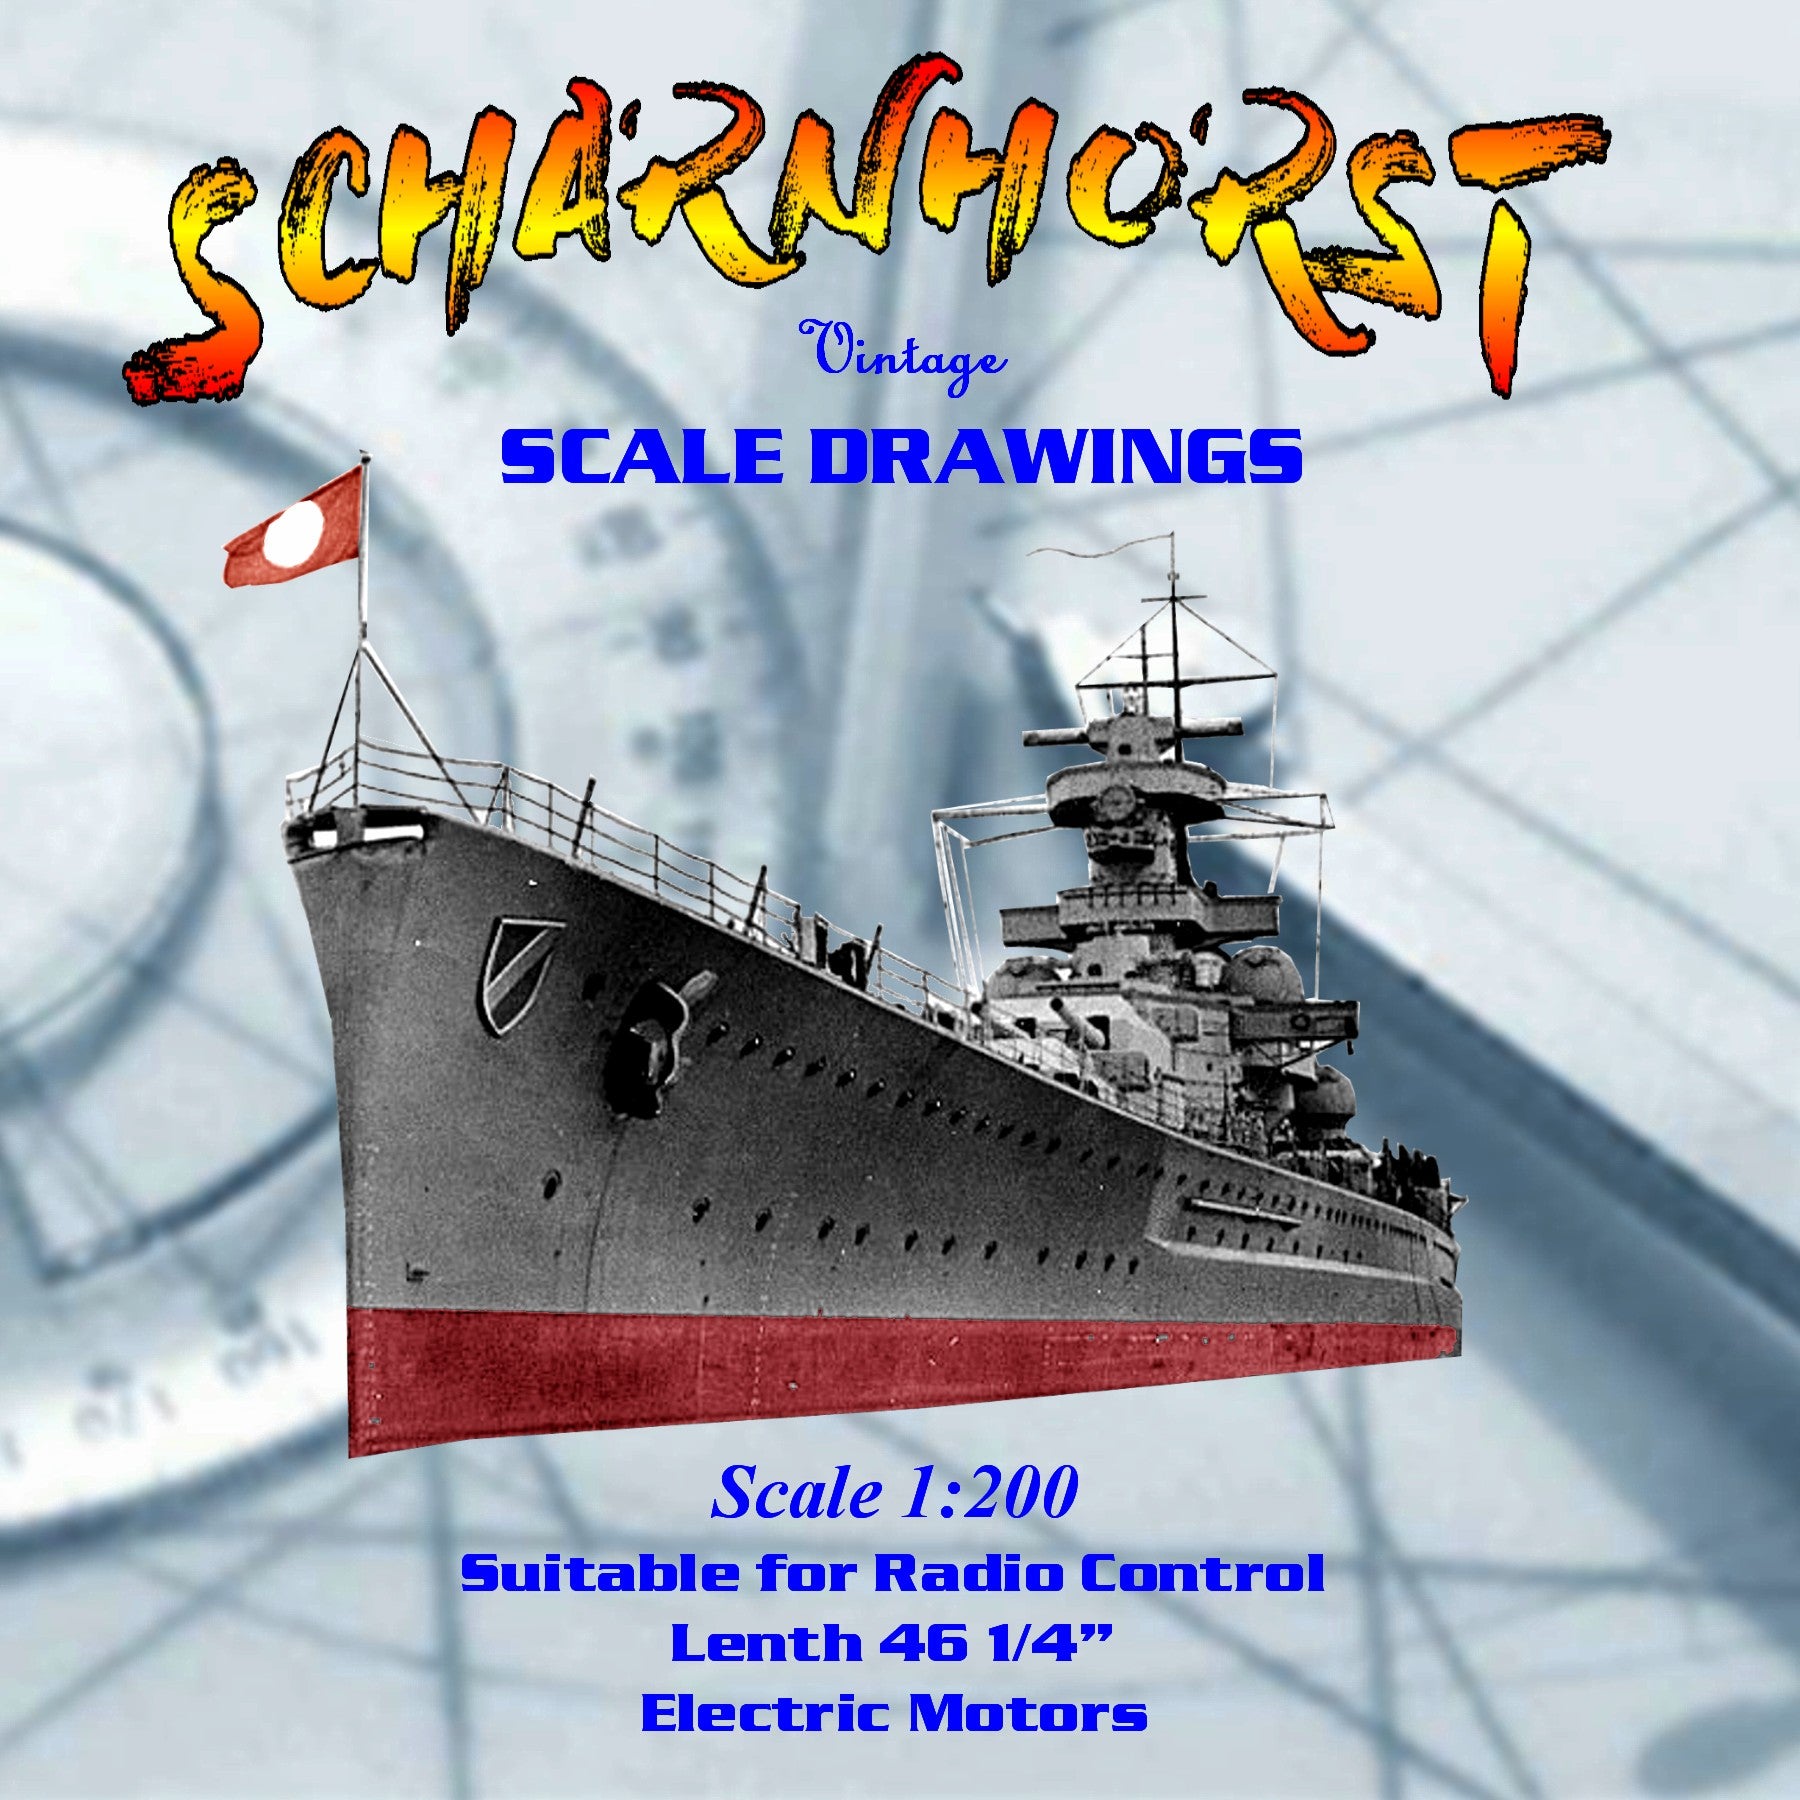 full size printed drawing scale 1/200 german battleship scharnhorst suitable for radio control